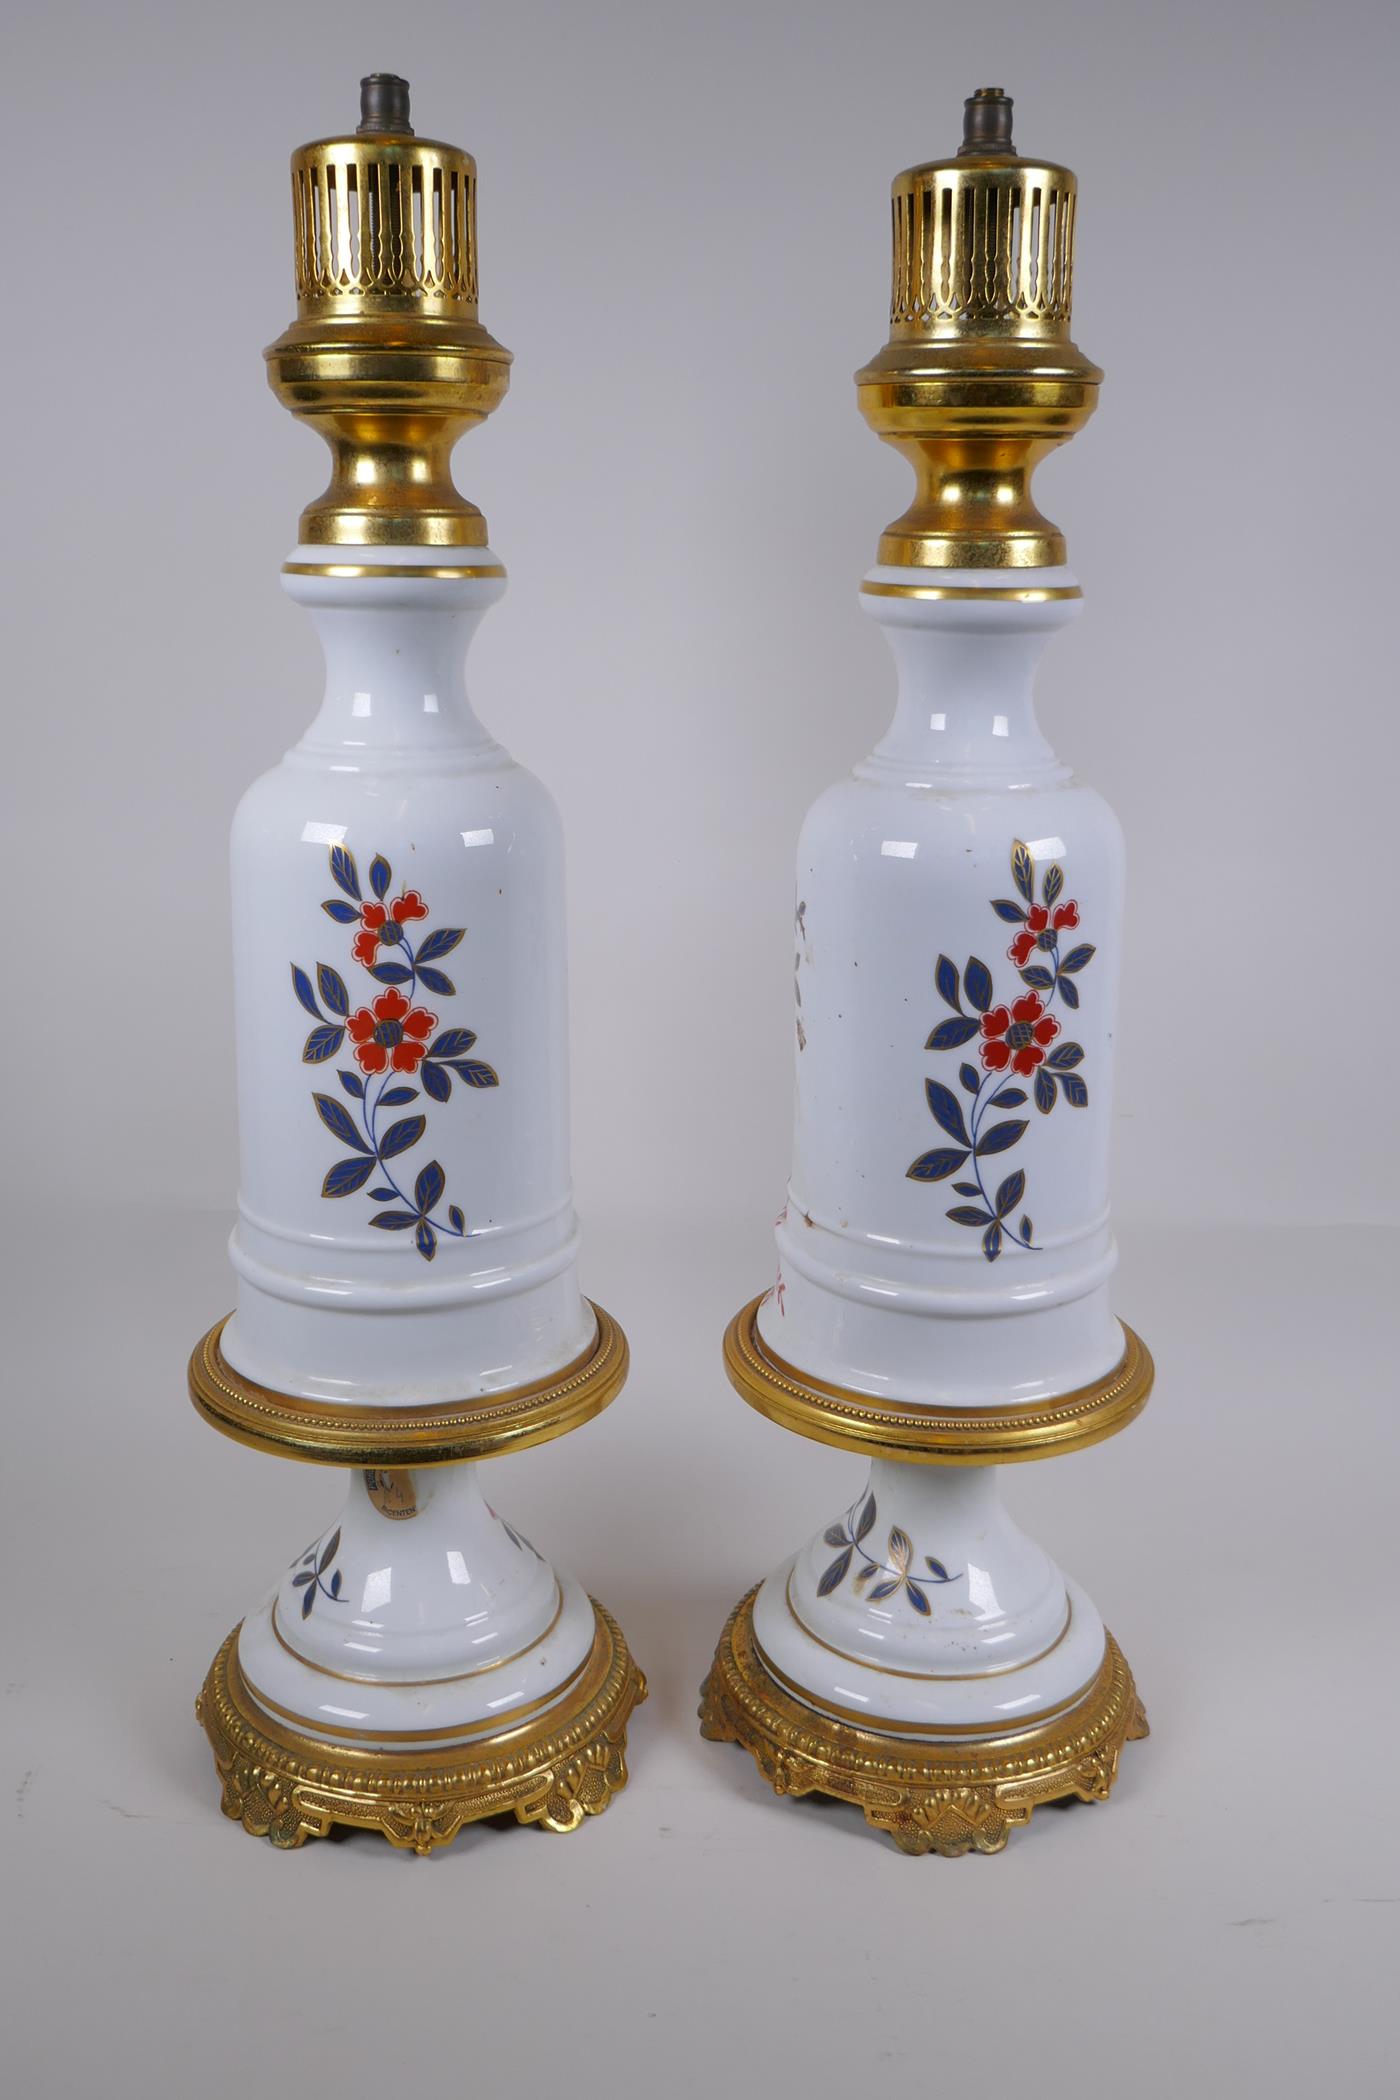 A pair of ormolu and porcelain lamp bases with Imari style decoration, 59cm high - Image 4 of 4